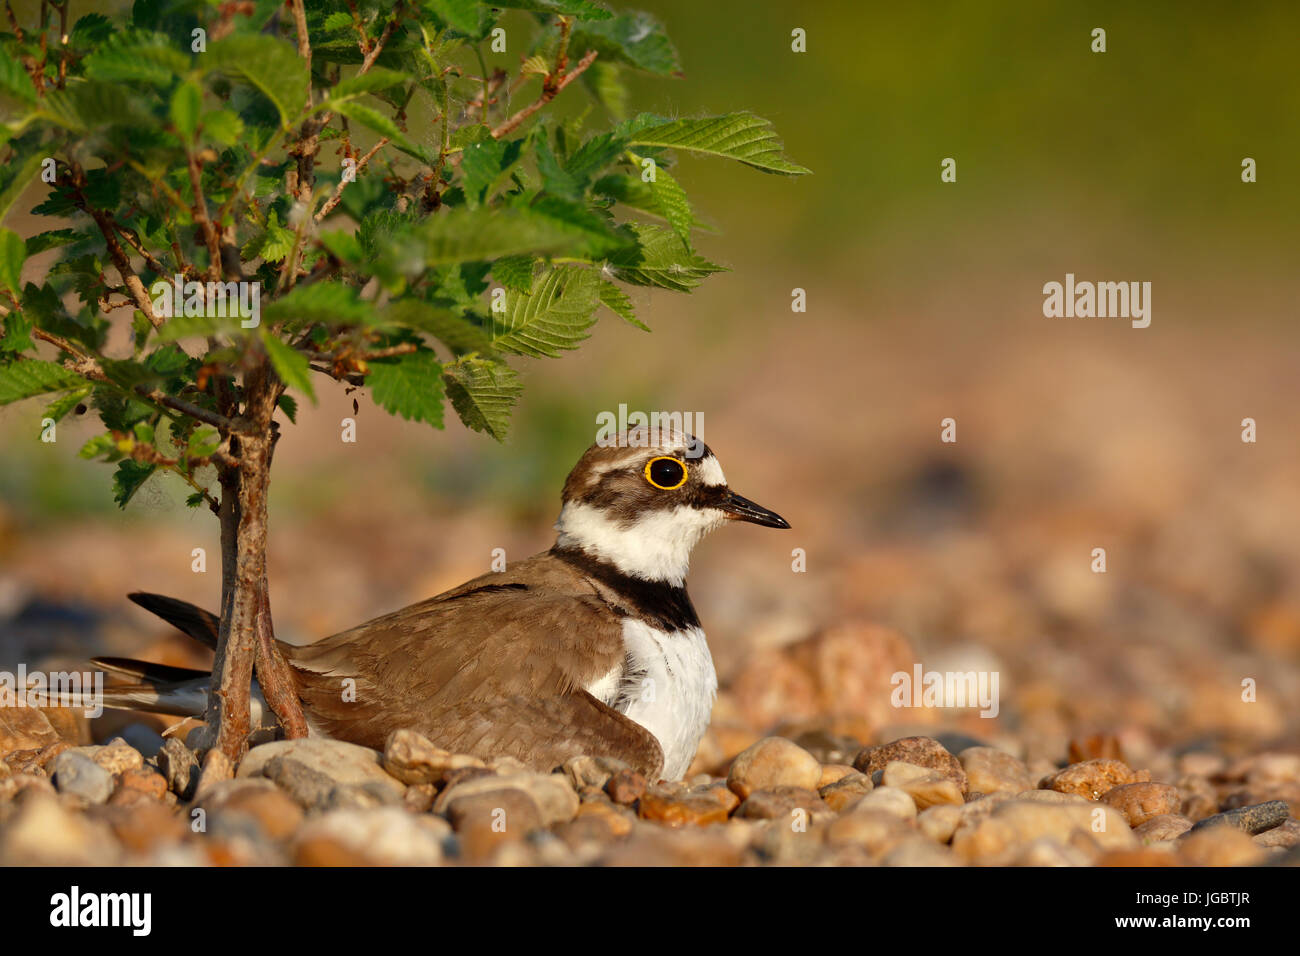 Little ringed plover (Charadrius dubius) sitting on nest, brooding, biosphere reserve Mittlere Elbe, Saxony-Anhalt, Germany Stock Photo